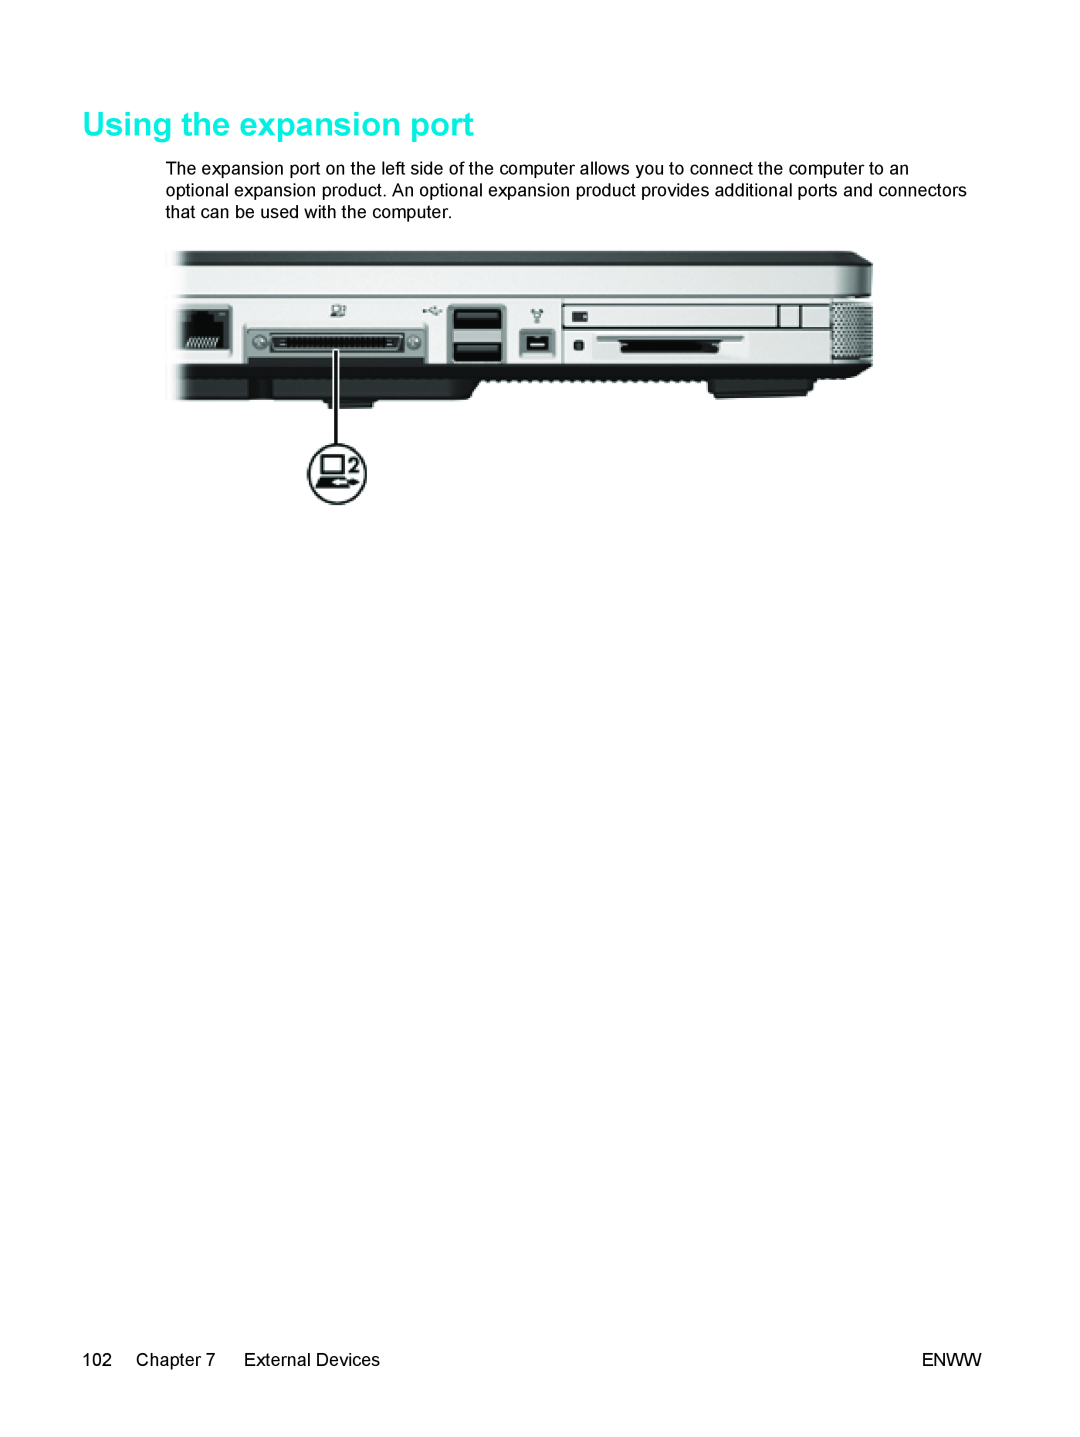 HP V5226TU, V5224TU, V5221TU, V5221EA, V5219TU, V5218TU, V5215LA, V5215TU, V5218LA Using the expansion port, External Devices 